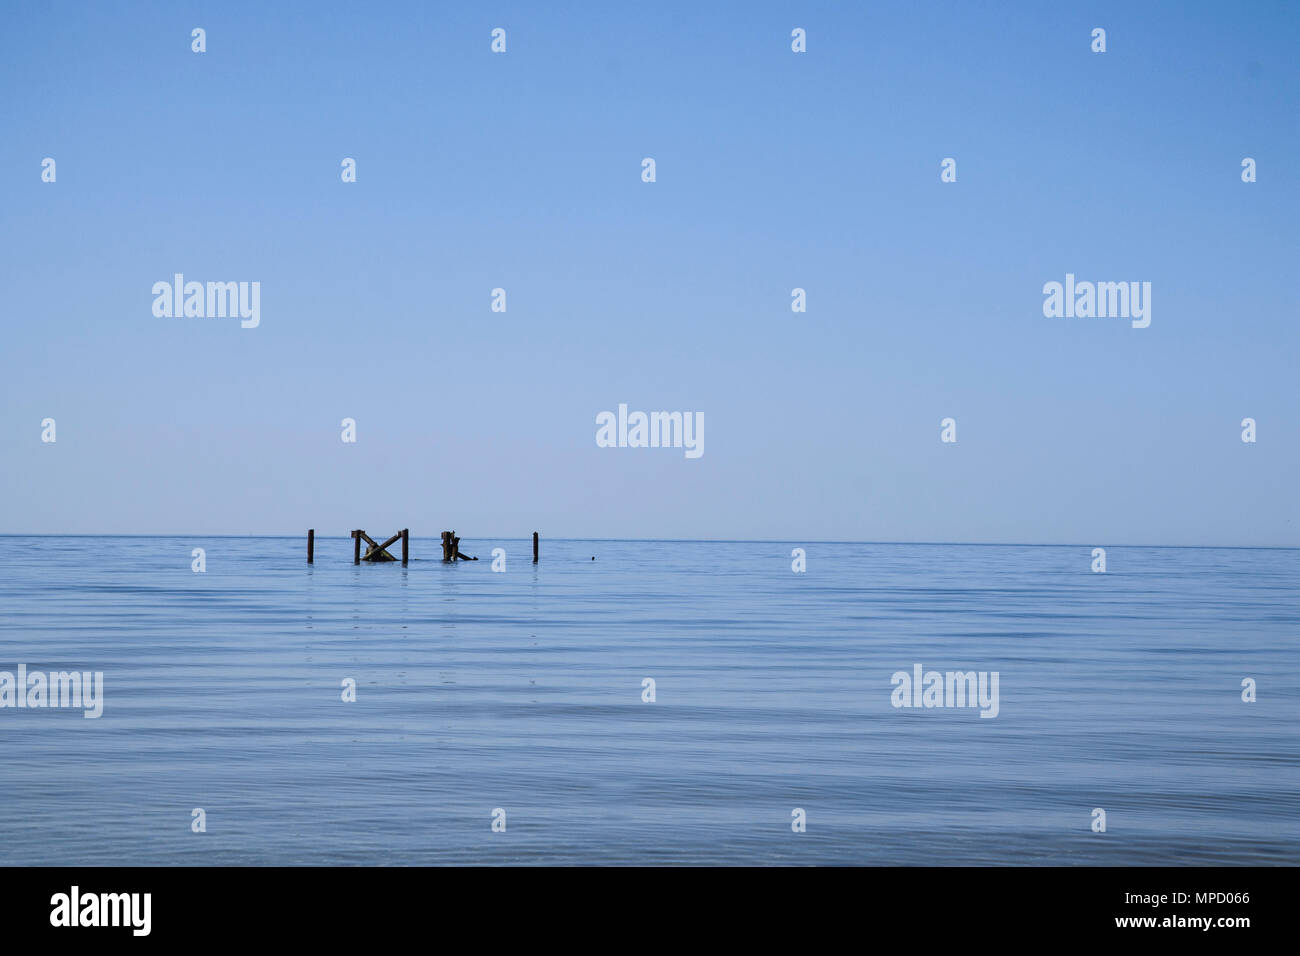 Blue sea. Blue sky. Some architectural objects in the water. Calm and minimalism composition Stock Photo